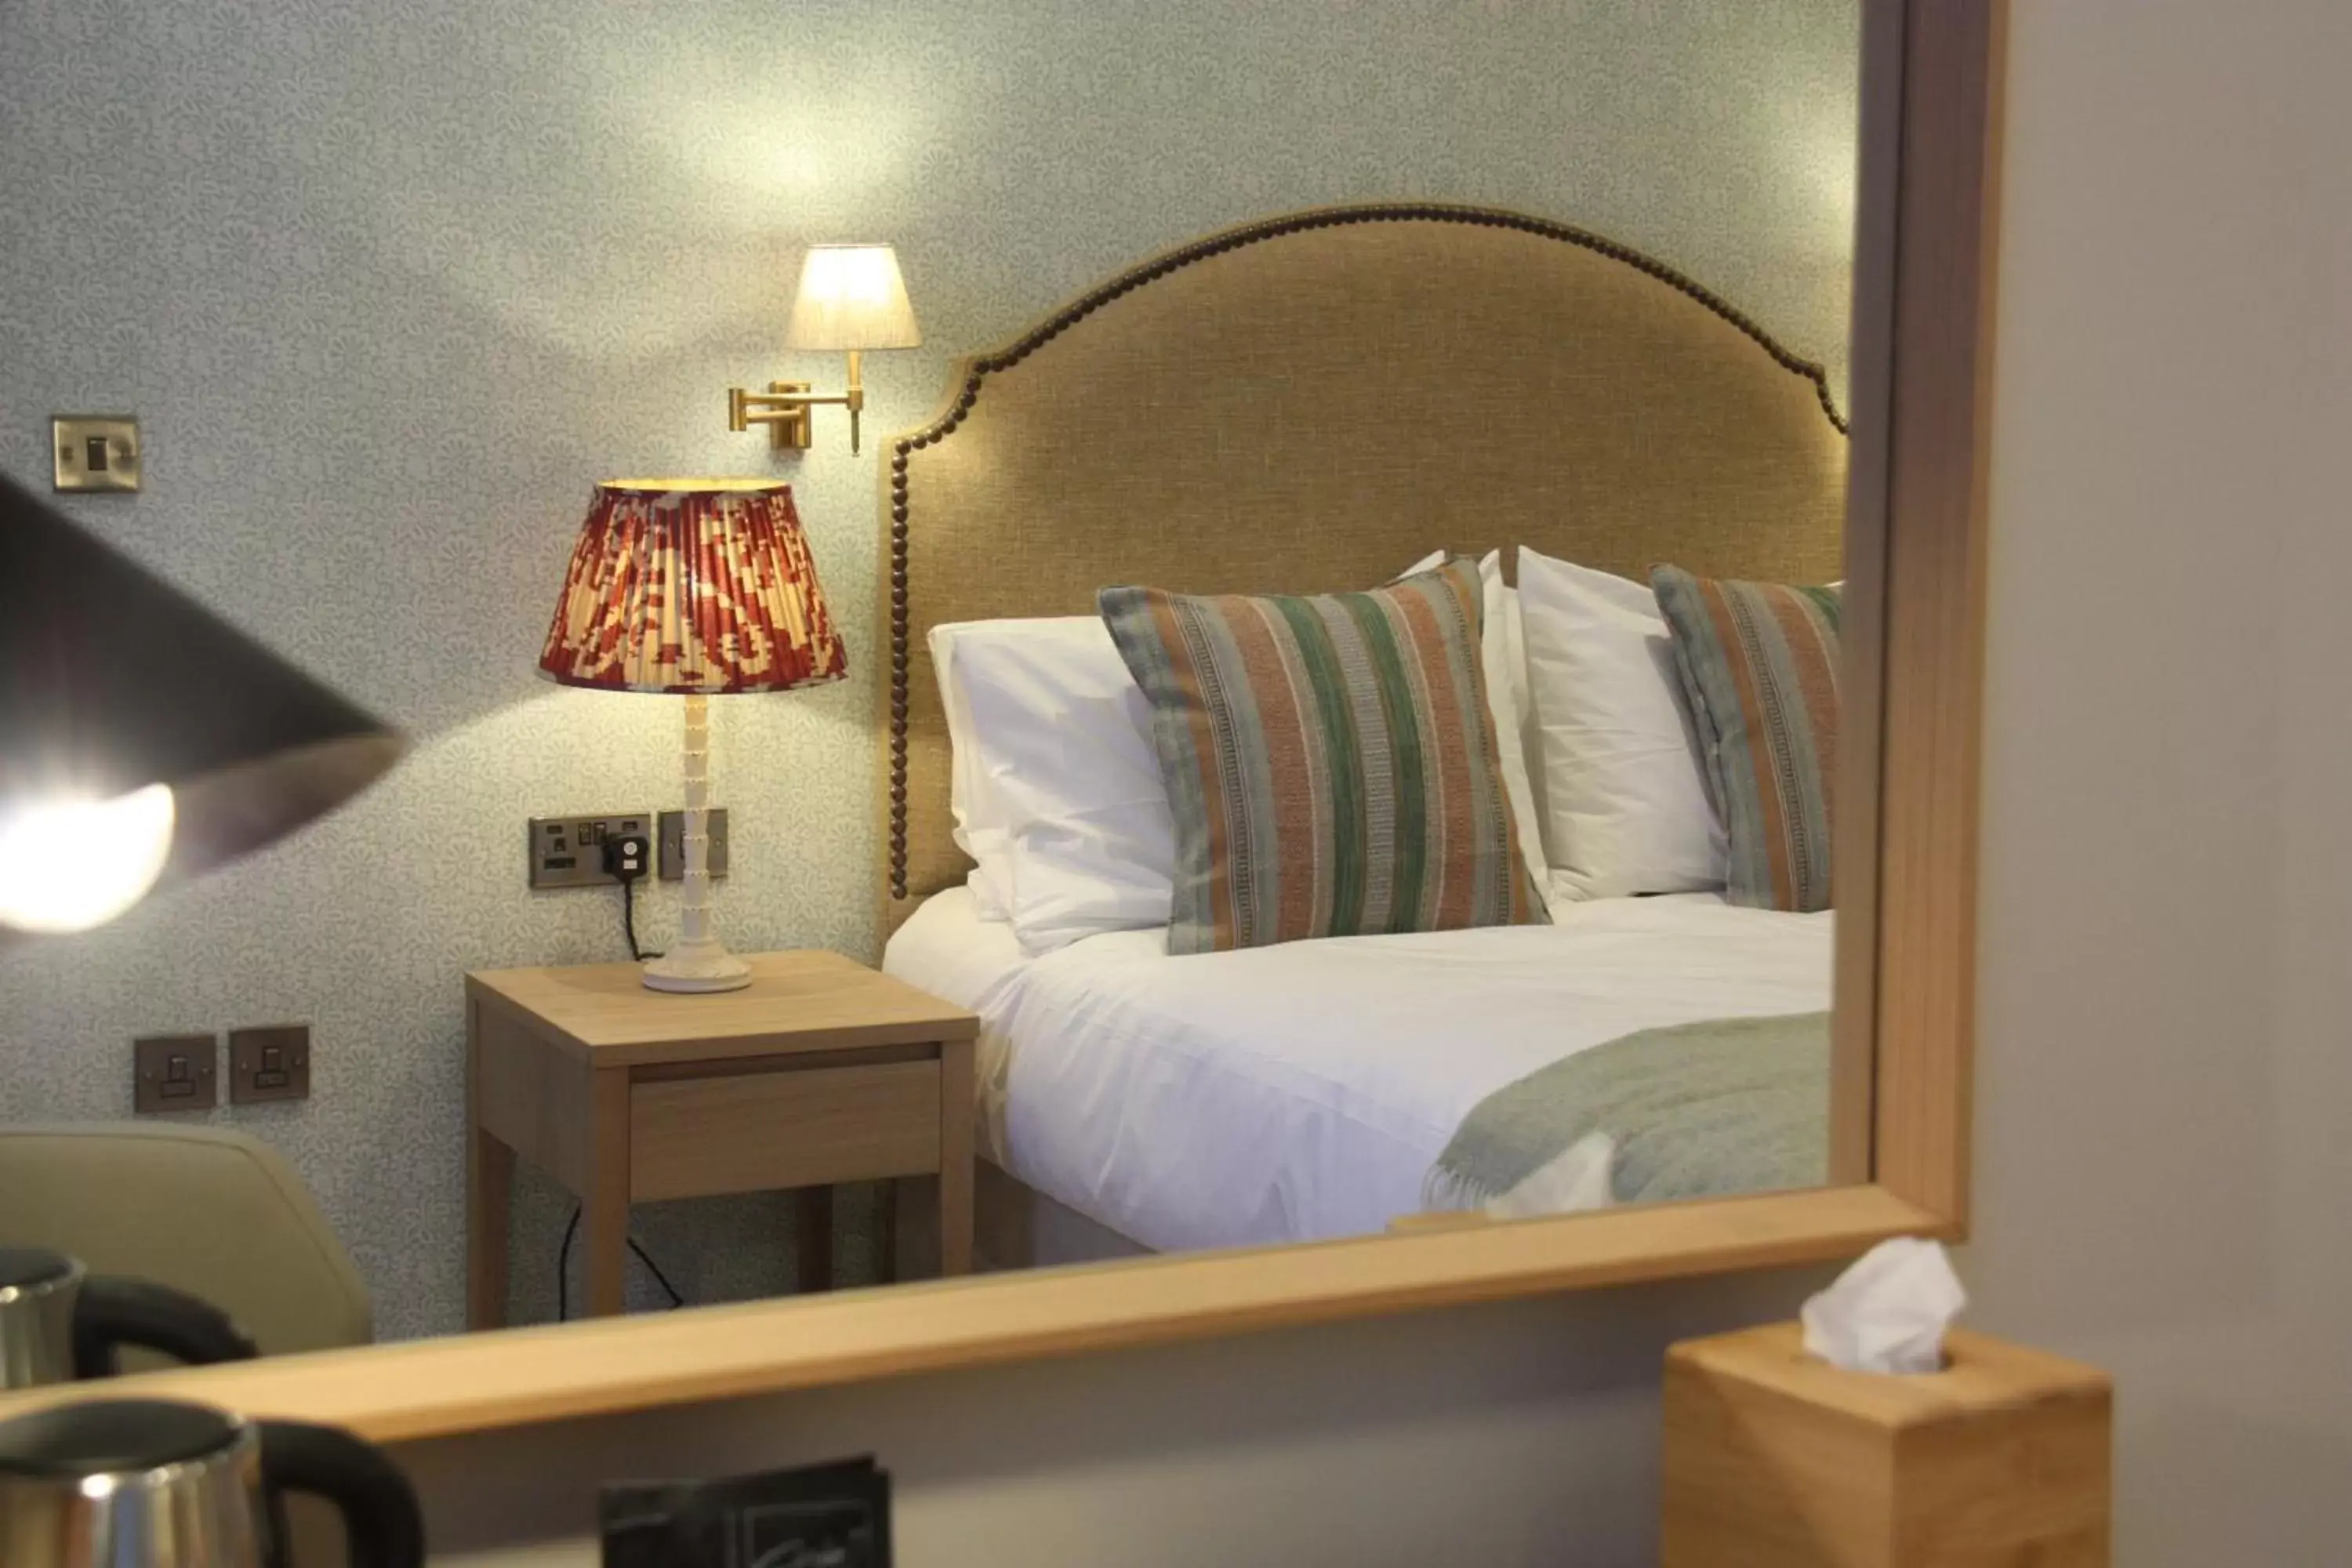 Bed in The Bell Hotel, Saxmundham